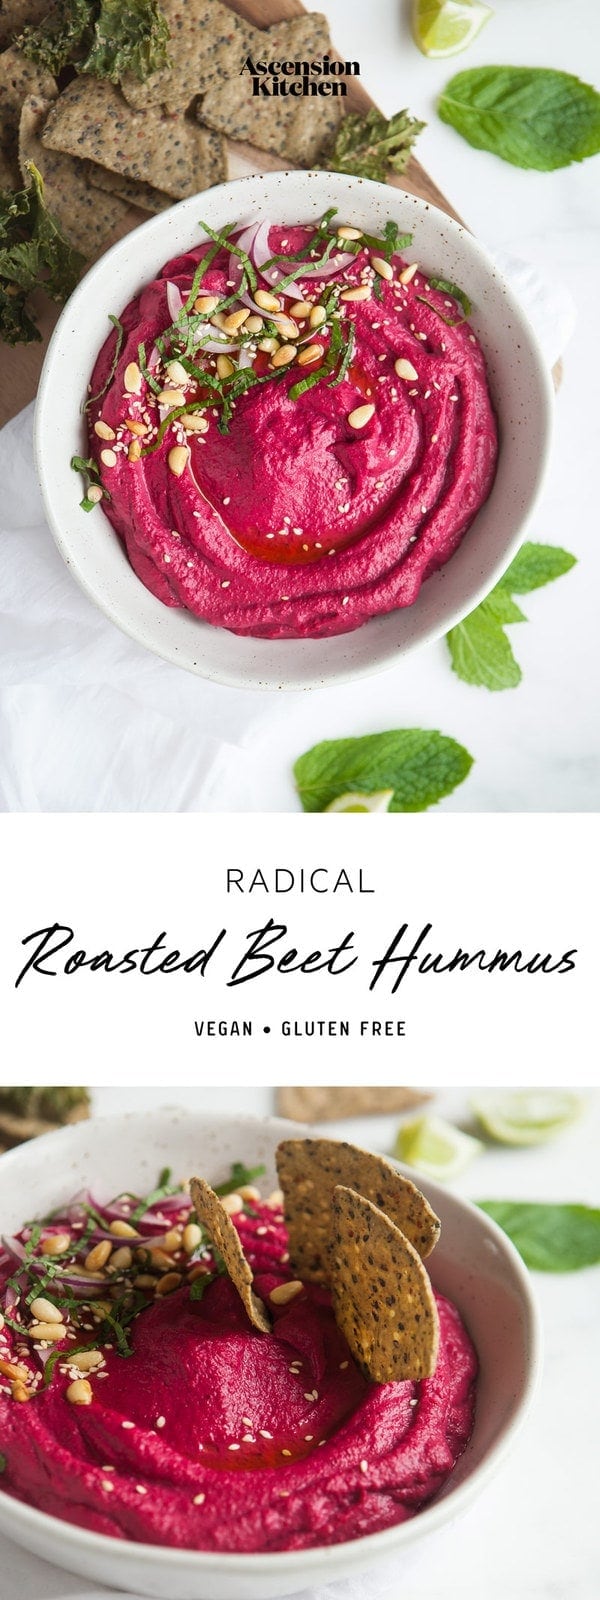 Radical Roasted Beet Hummus – check out the recipe to learn how to make it silky smooth! #roastedbeethummus #roastedbeethummusrecipe #roastedbeethummusvegans #roastedbeethummusdips #roastedbeethummushealthy #roastedbeethummusglutenfree #beethummus #beethummusroasted #beethummusrecipe #beethummusred #beethummusvegan #beethummushealthy #beethummuscanned #AscensionKitchen // Pin to your own inspiration board! //